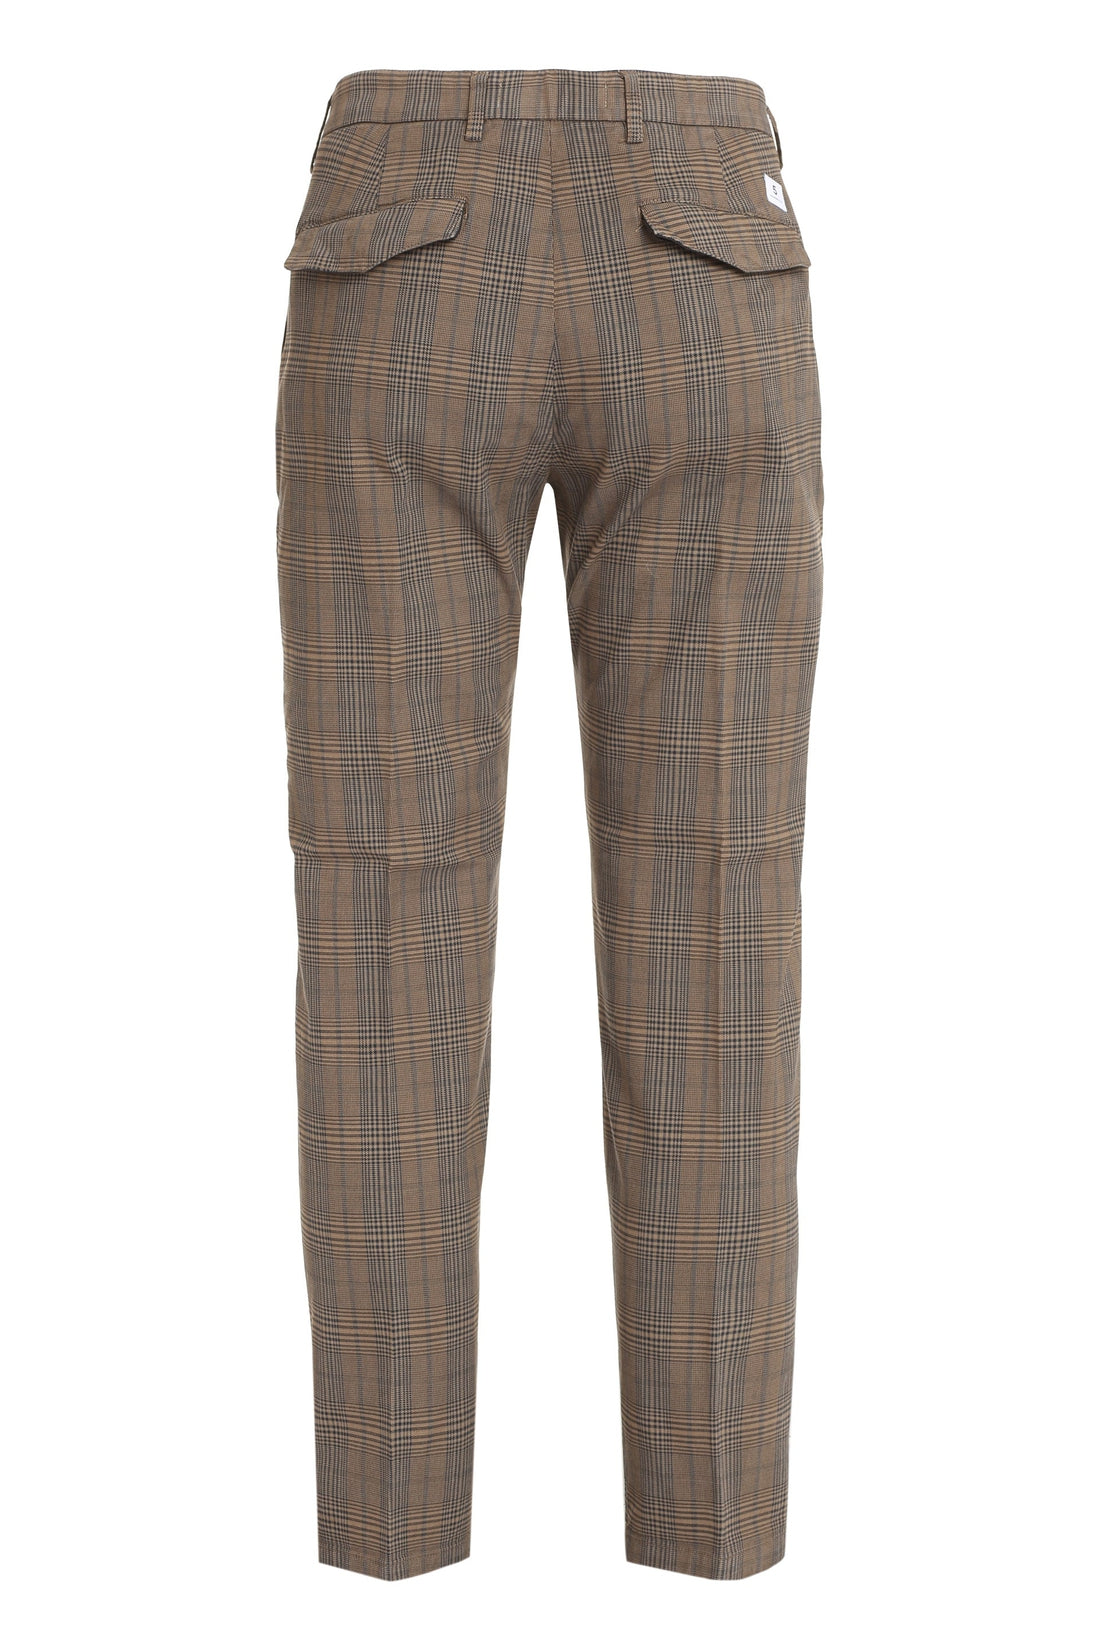 Piralo-OUTLET-SALE-Stretch cotton chino trousers-ARCHIVIST